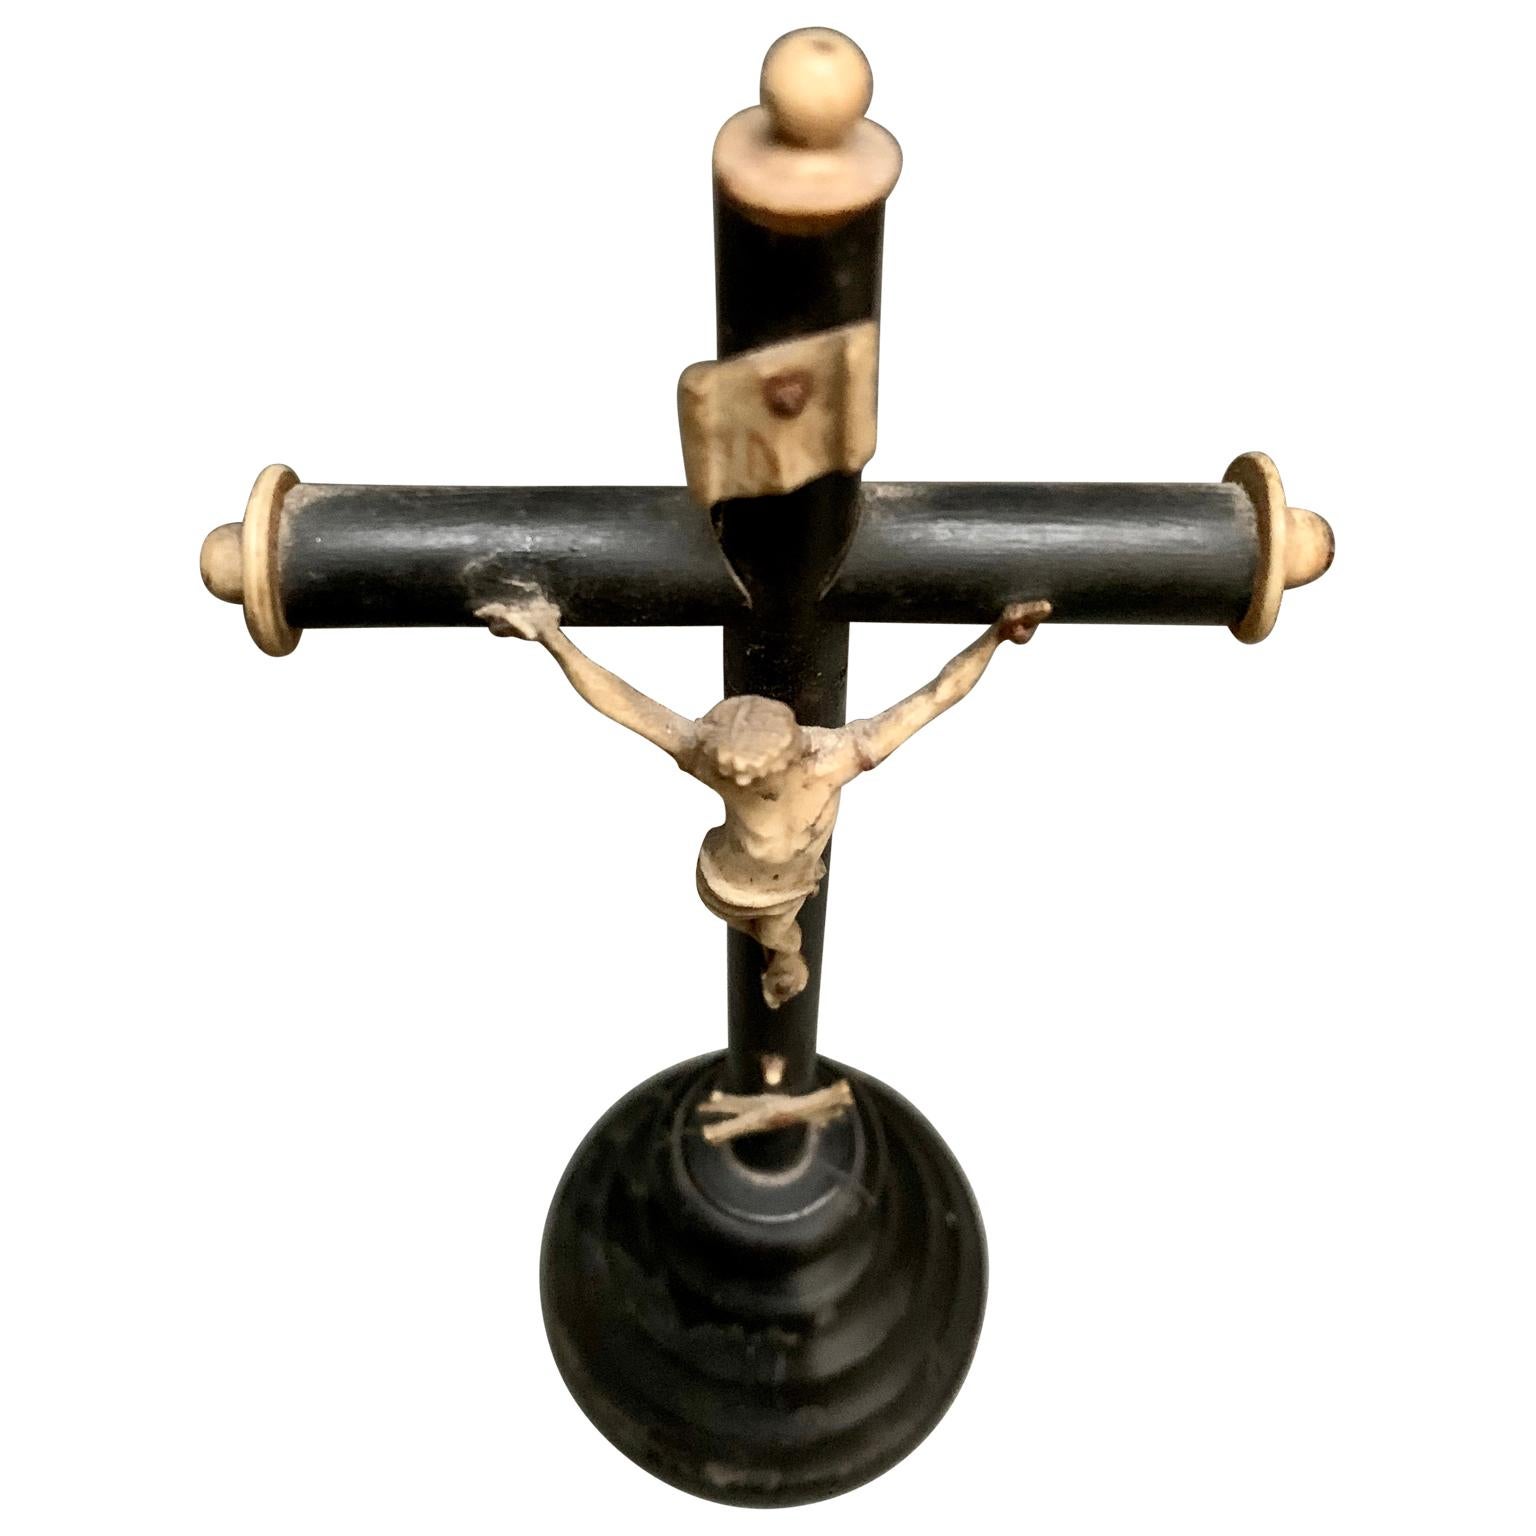 An 18th Century miniature crucifix. The Corpus of Christ is carved in bone. European, found in Belgium.